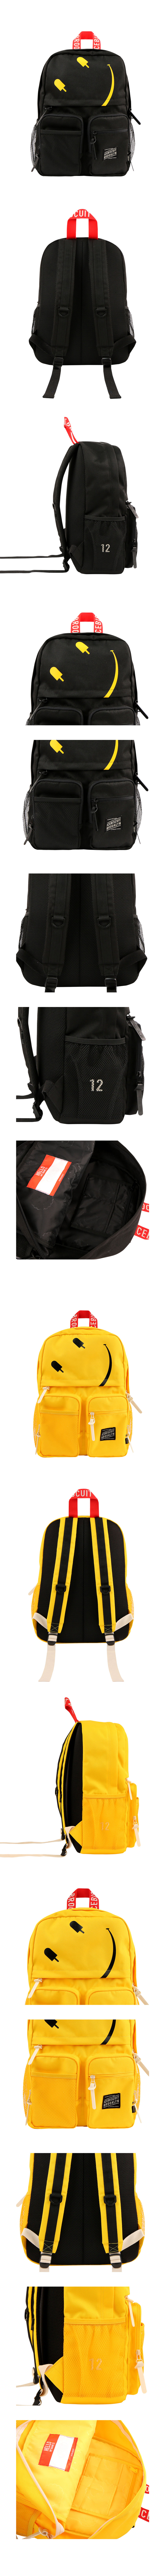 Smile icebiscuit double pocket backpack 상세 이미지